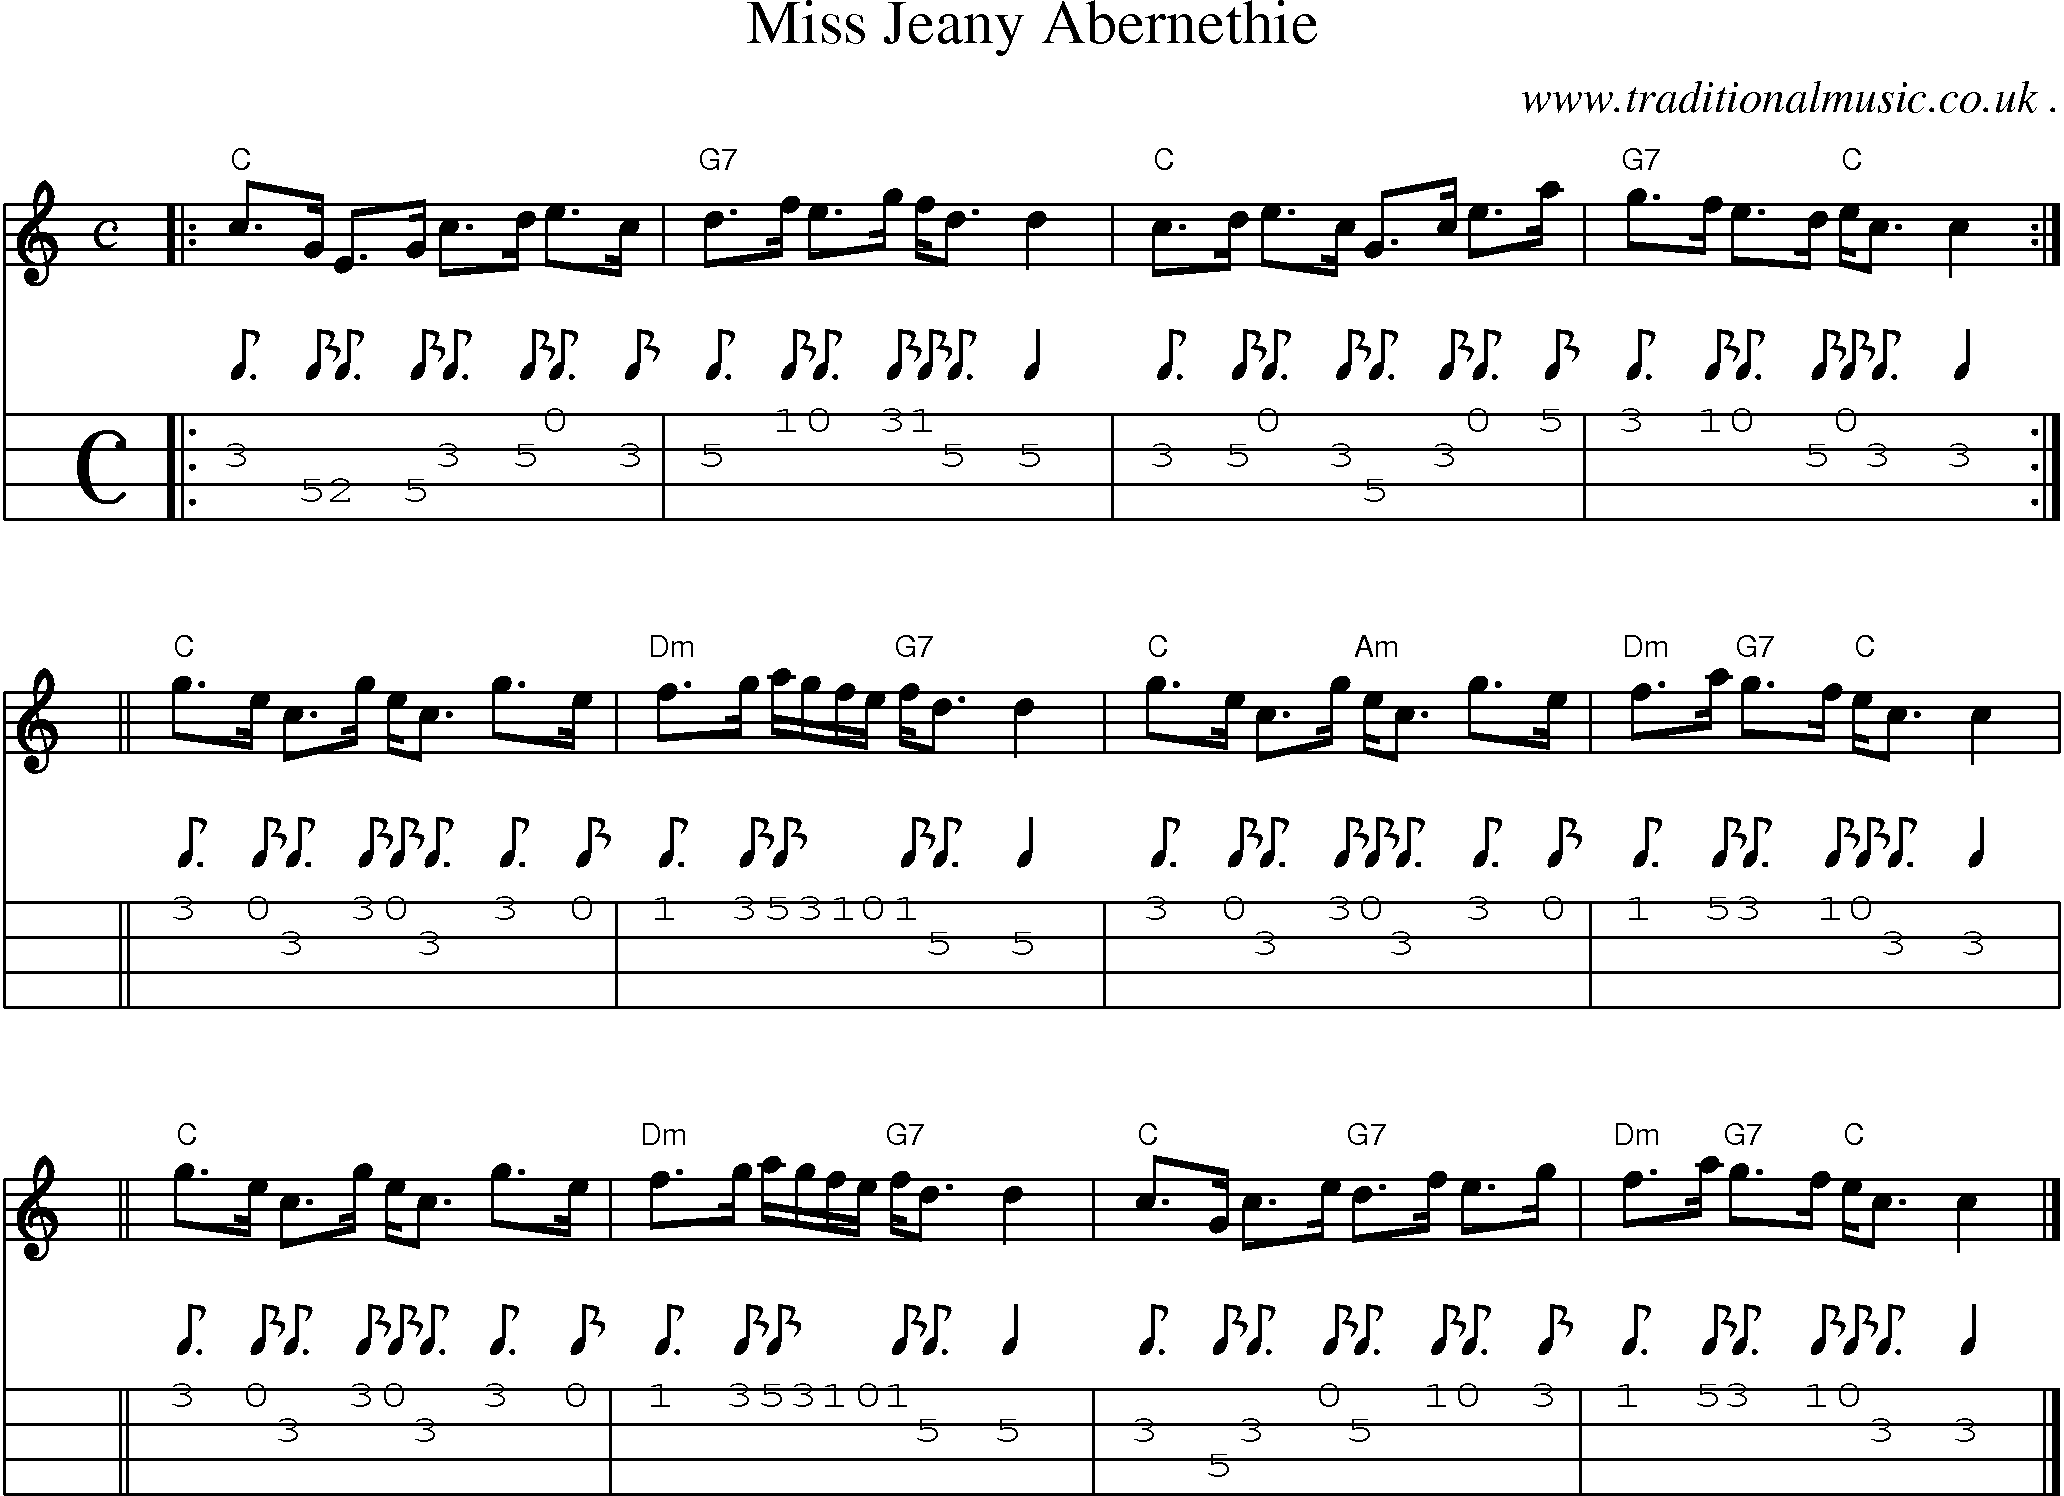 Sheet-music  score, Chords and Mandolin Tabs for Miss Jeany Abernethie